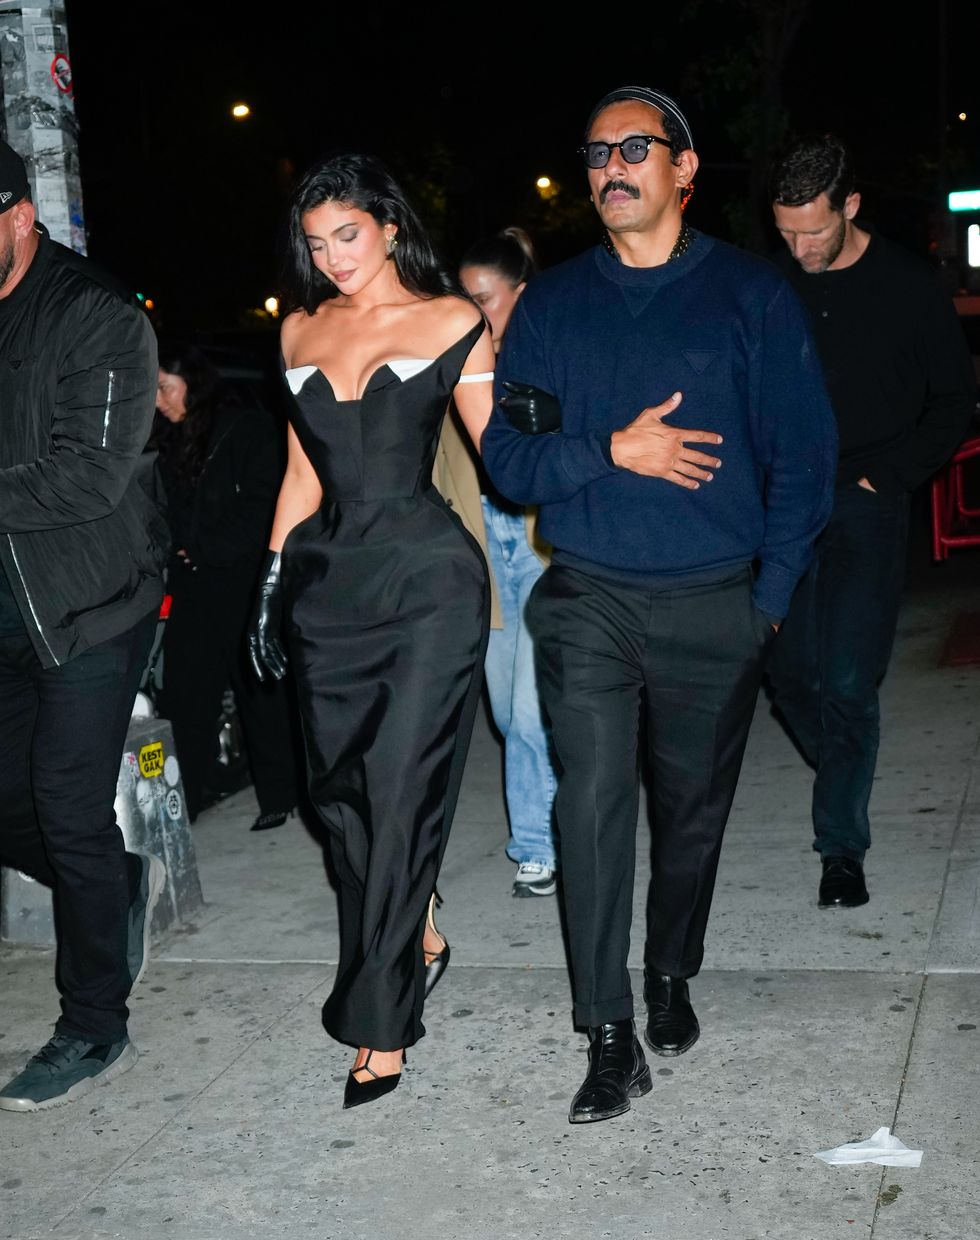 Kylie Jenner in the New Look of the Corset Dress